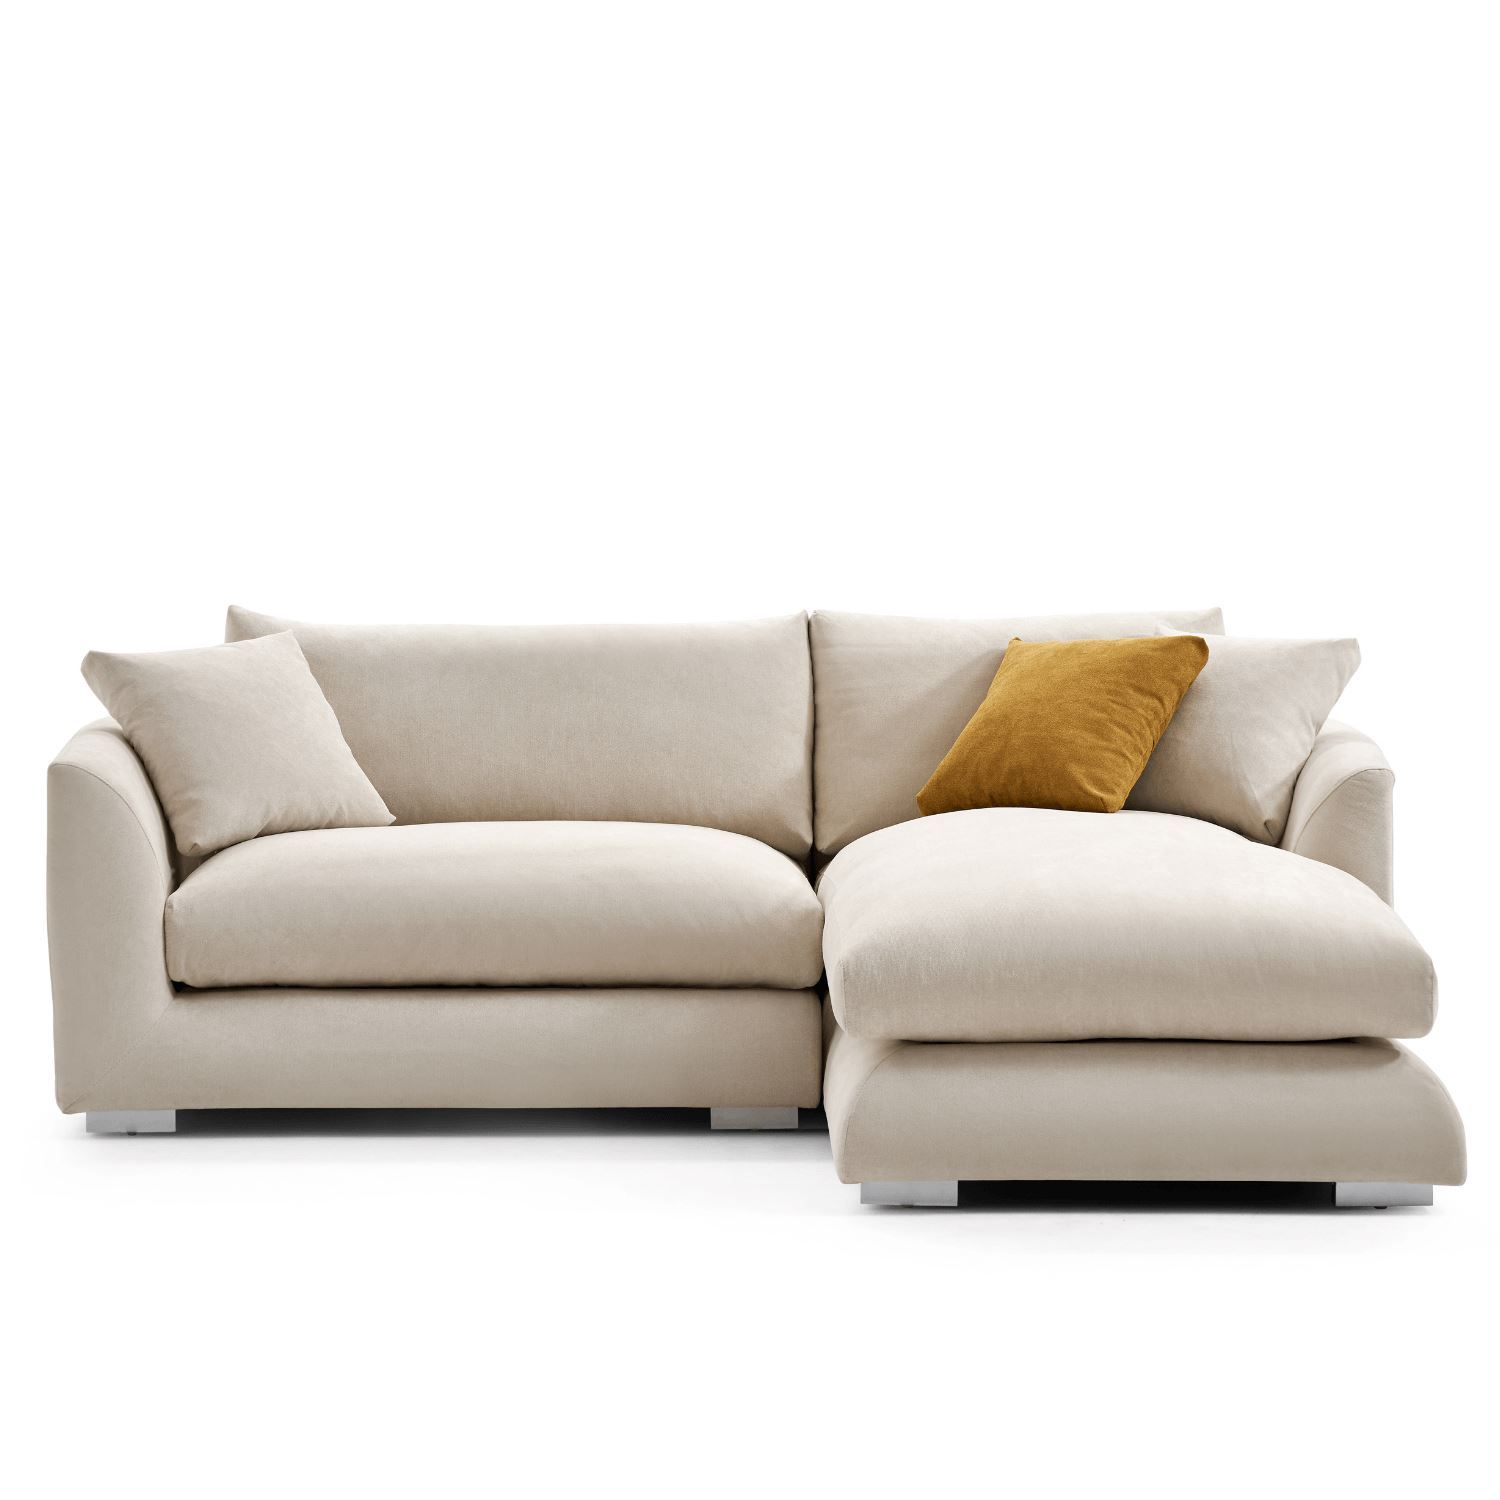 Feathers Sectional Sofa Mario Capasa 88 inch Beige Facing Right